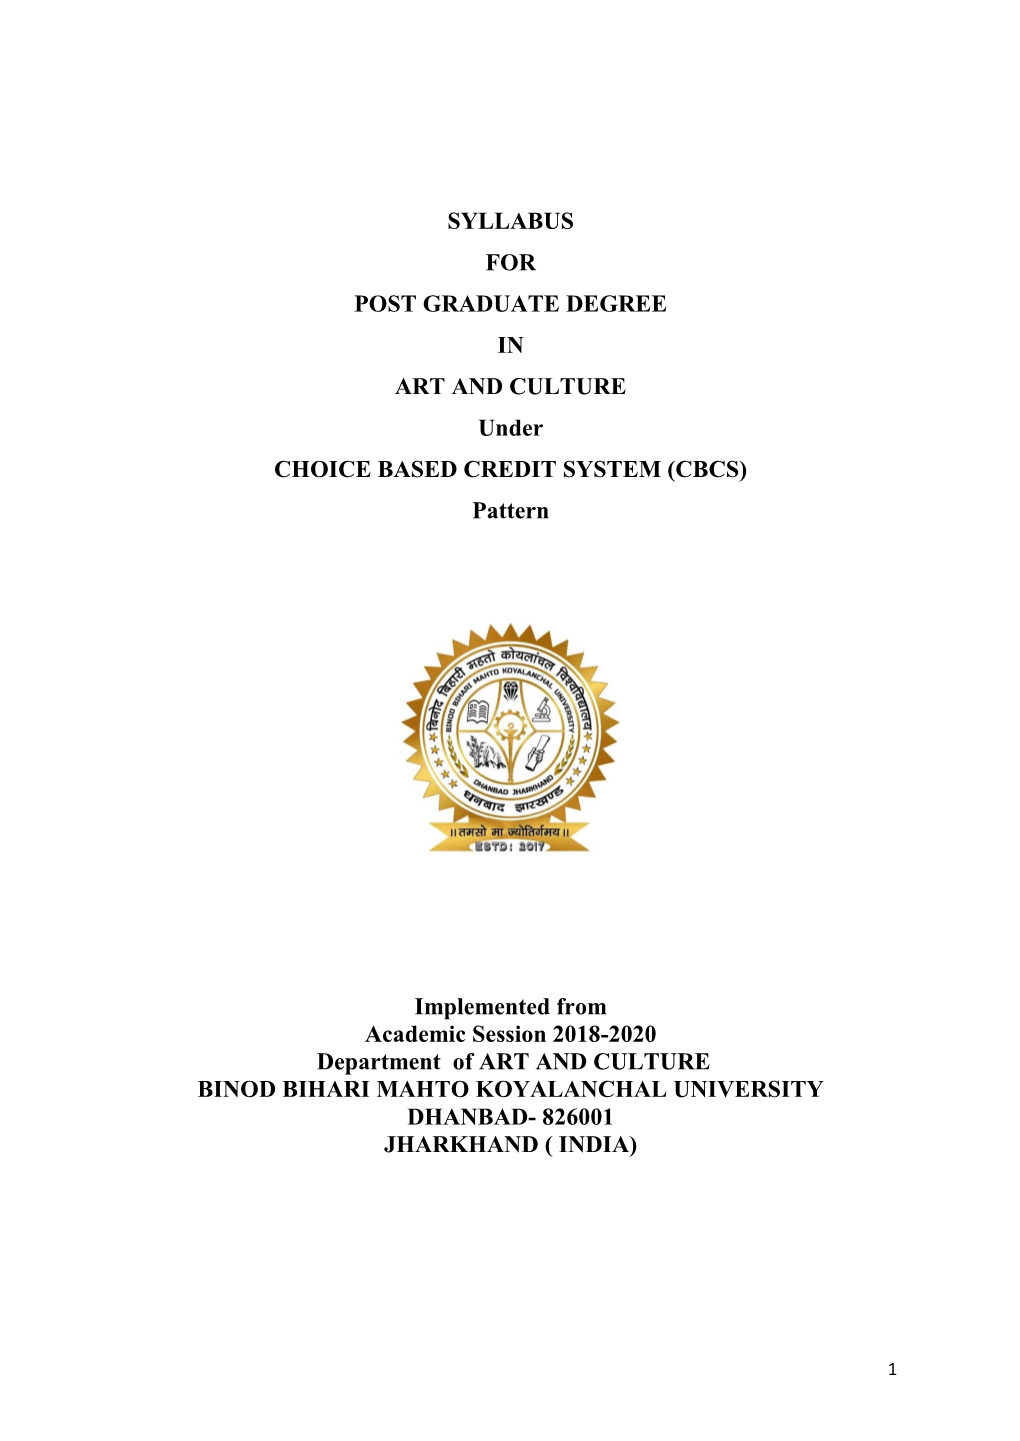 SYLLABUS for POST GRADUATE DEGREE in ART and CULTURE Under CHOICE BASED CREDIT SYSTEM (CBCS) Pattern Implemented from Academic